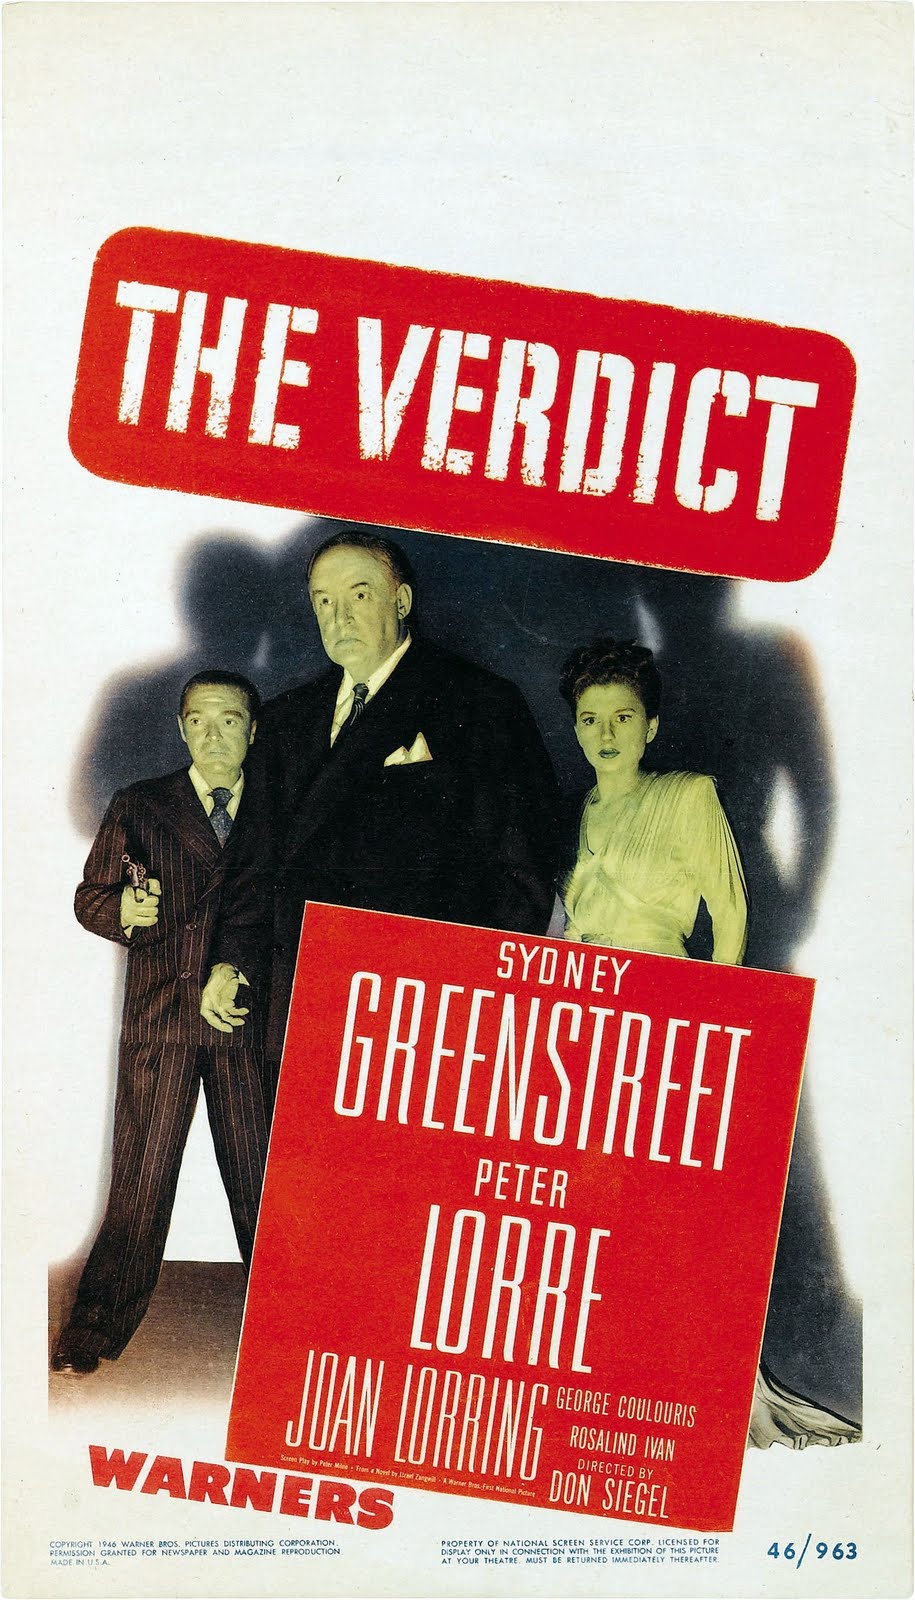 Verdict spelled out on red background. Two guys and lady against it in background with a shadow. Sydney Greenstreet, Peter Lorre, Joan Lorring have their names against a red background.